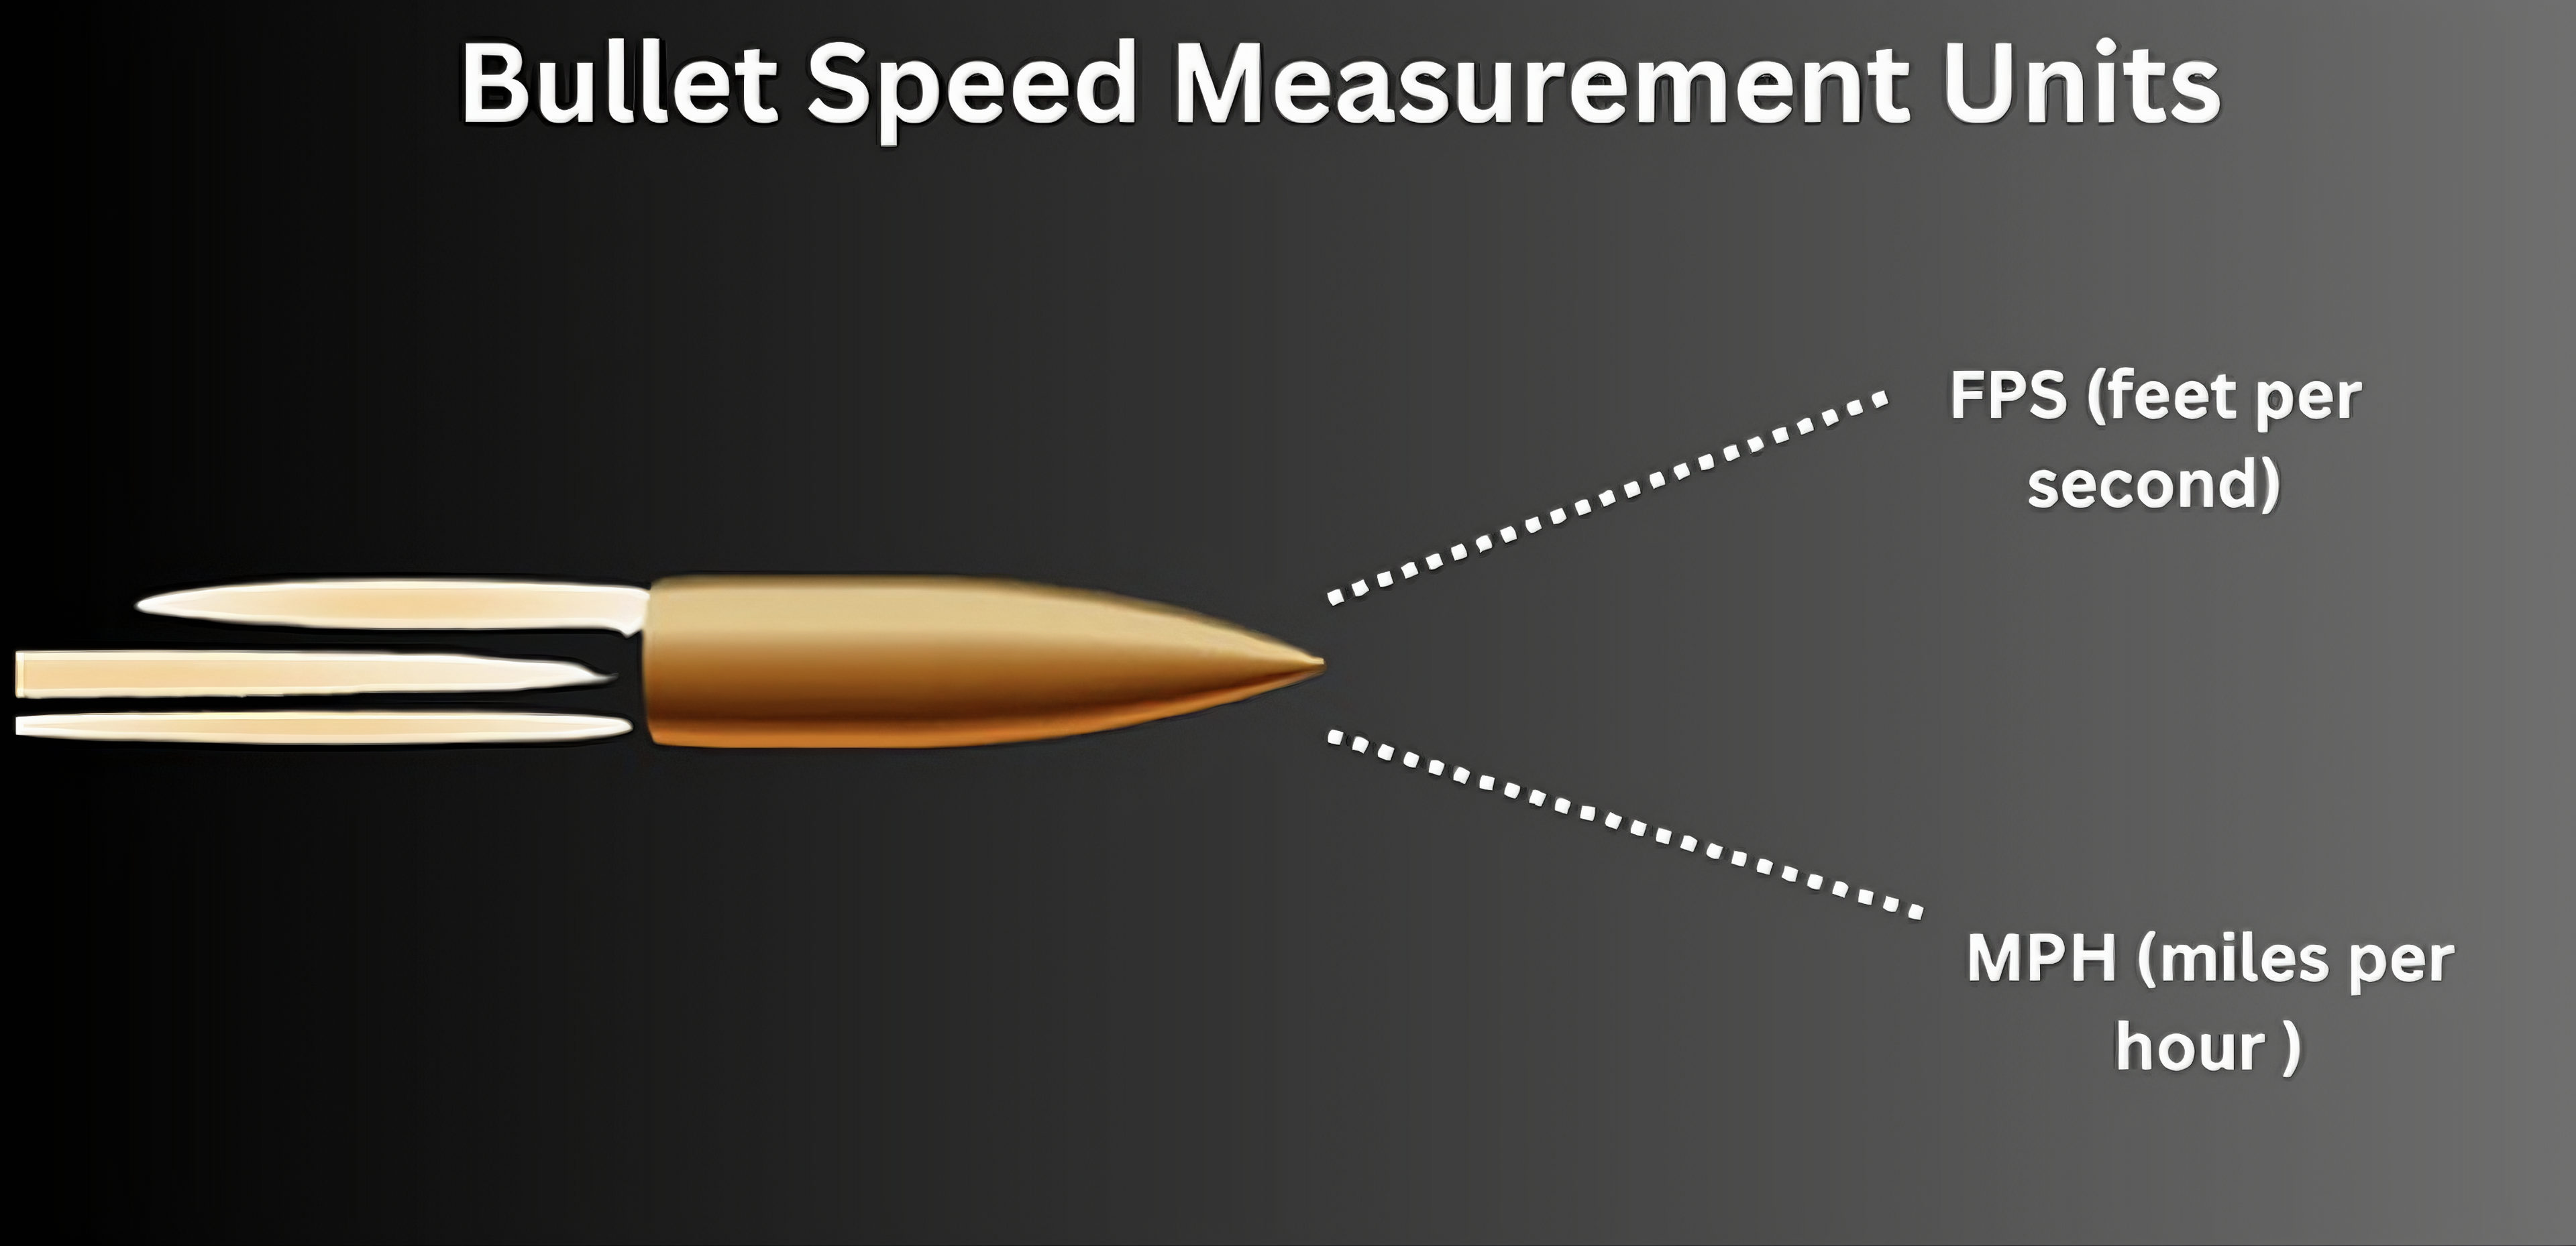 <img src="fps-explanation-picture.jpg" alt="Image showing a bullet with an accompanying display indicating FPS (Frames Per Second), a measure of speed in video or projectile velocity">